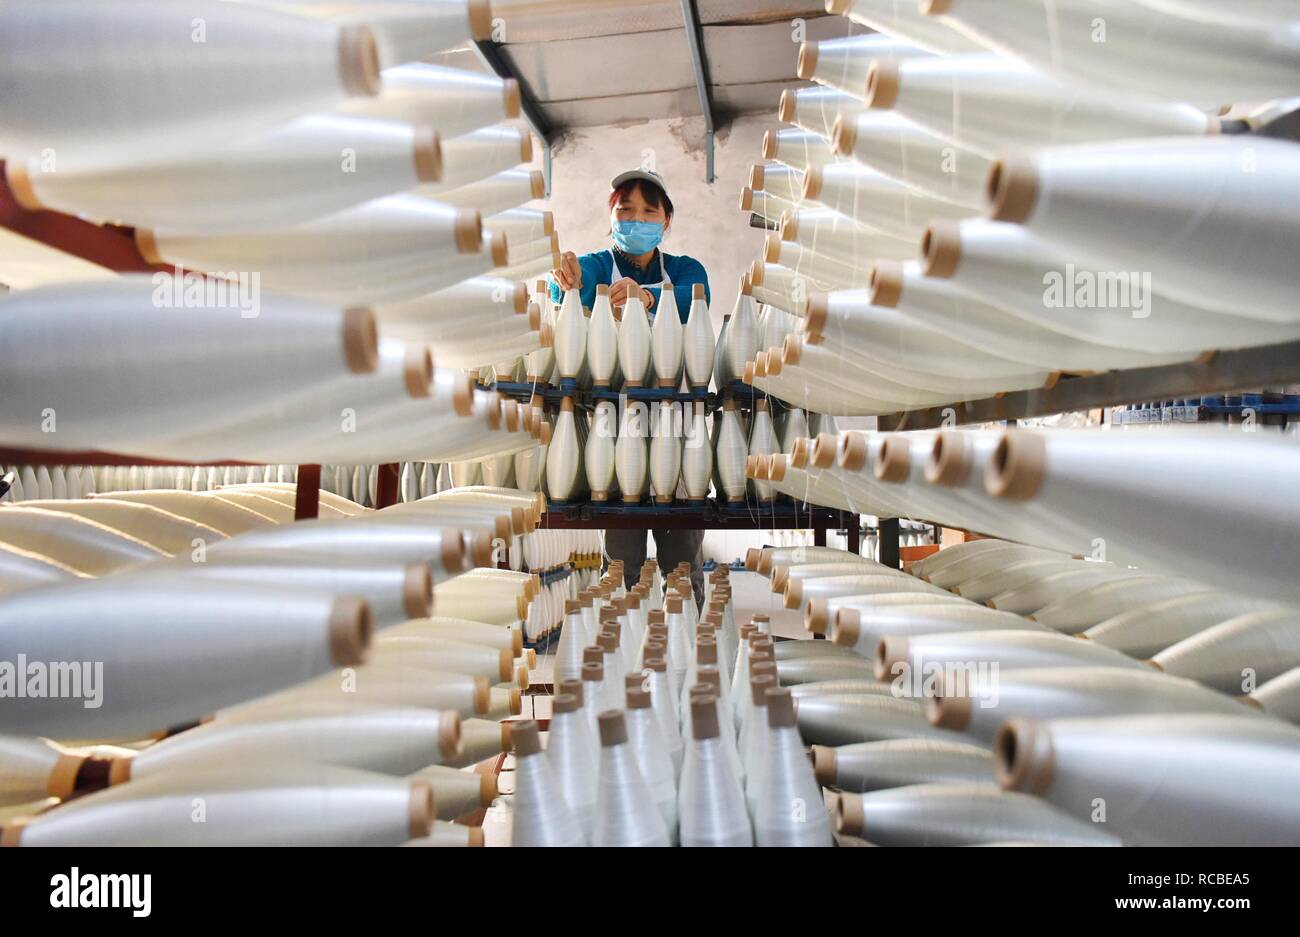 (190115) -- BEIJING, Jan. 15, 2019 (Xinhua) -- A worker arranges fiberglass products for export at the economic development zone in Yiyuan County, east China's Shandong Province, Nov. 12, 2018. Over 80 companies in Yiyuan have developed their export business. China's foreign trade rose 9.7 percent year on year to a historic high of 30.51 trillion yuan (about 4.5 trillion U.S. dollars) in 2018, the General Administration of Customs (GAC) said Monday. Exports rose 7.1 percent year on year to 16.42 trillion yuan last year, while imports grew 12.9 percent to 14.09 trillion yuan, resulting Stock Photo